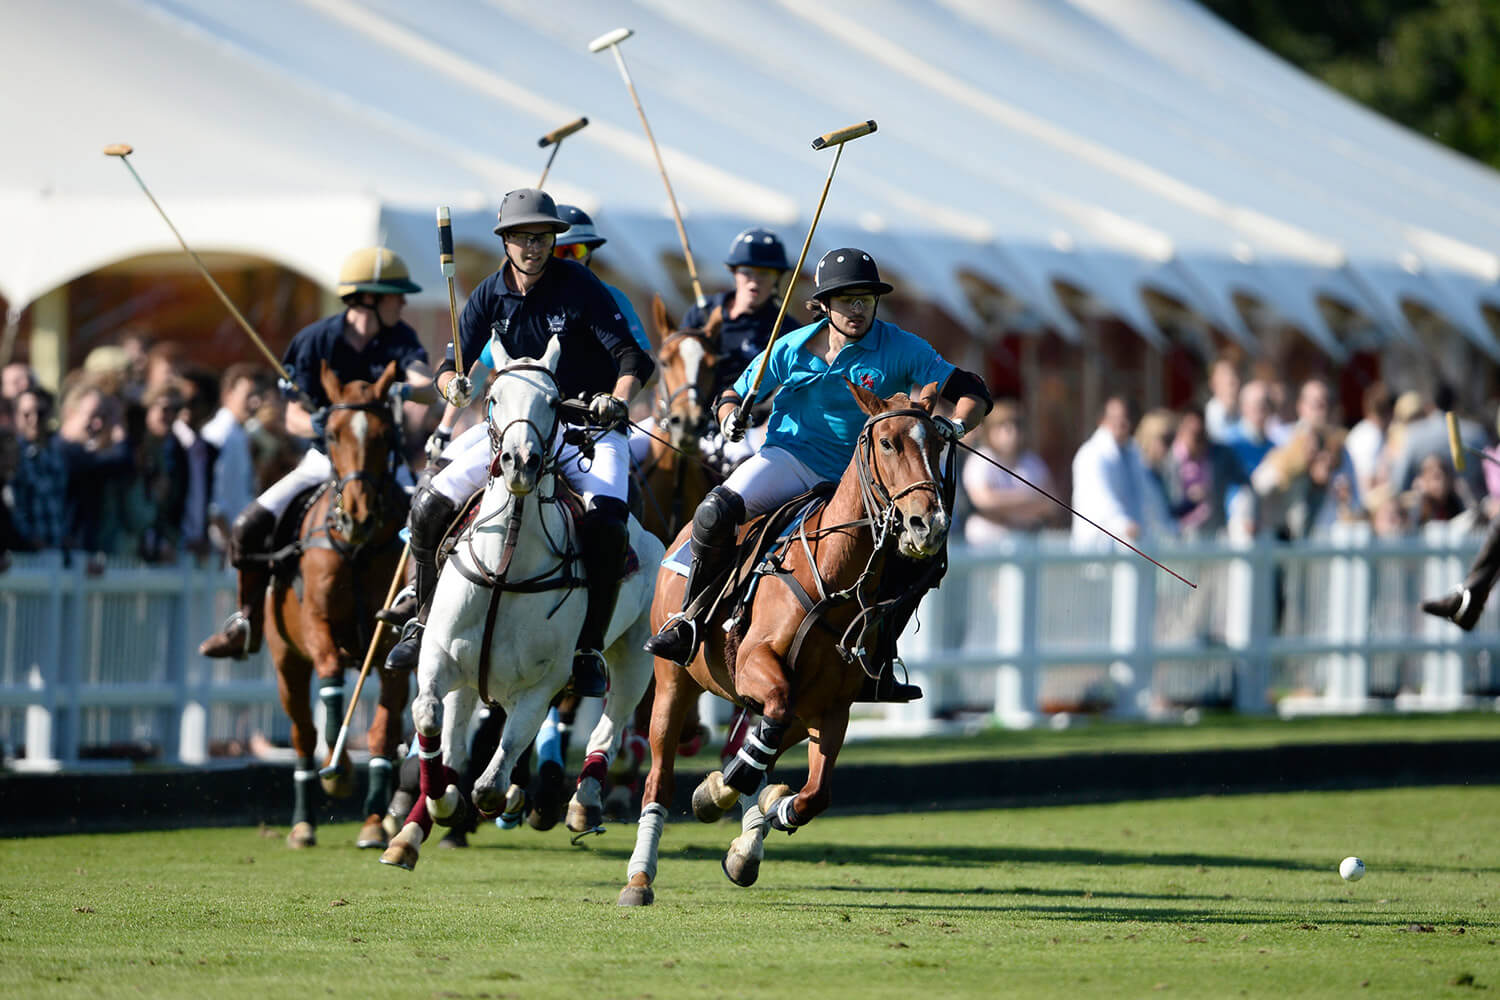 Polo: what could possibly go wrong?